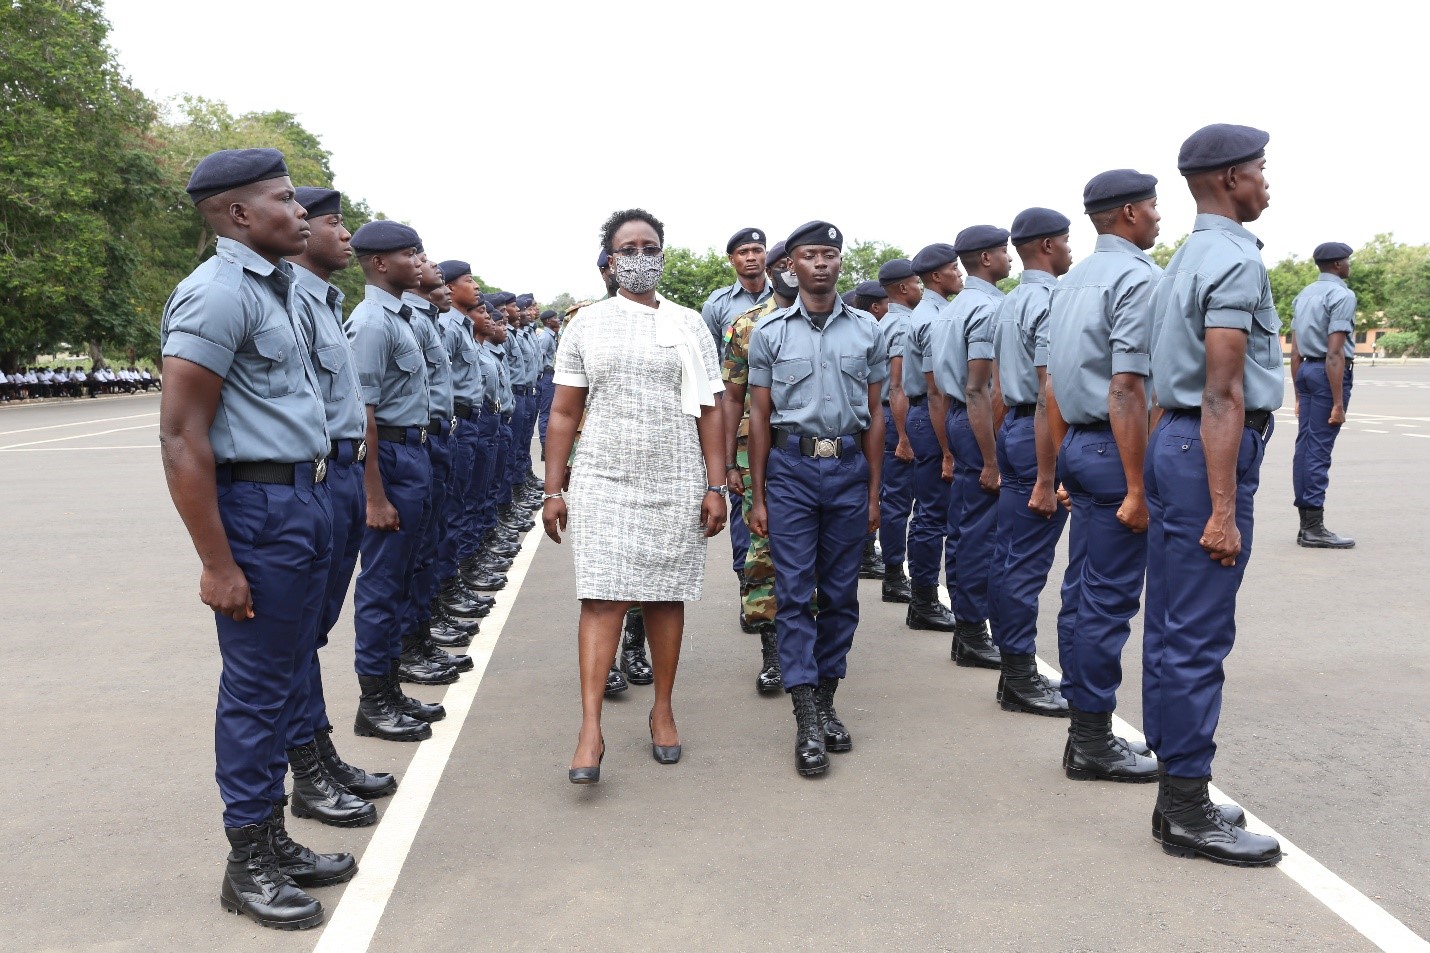 DIRECTOR OF PORT OF TEMA ENTREATS NEW SECURITY RECRUITS TO BE COMMITTED TO DUTY